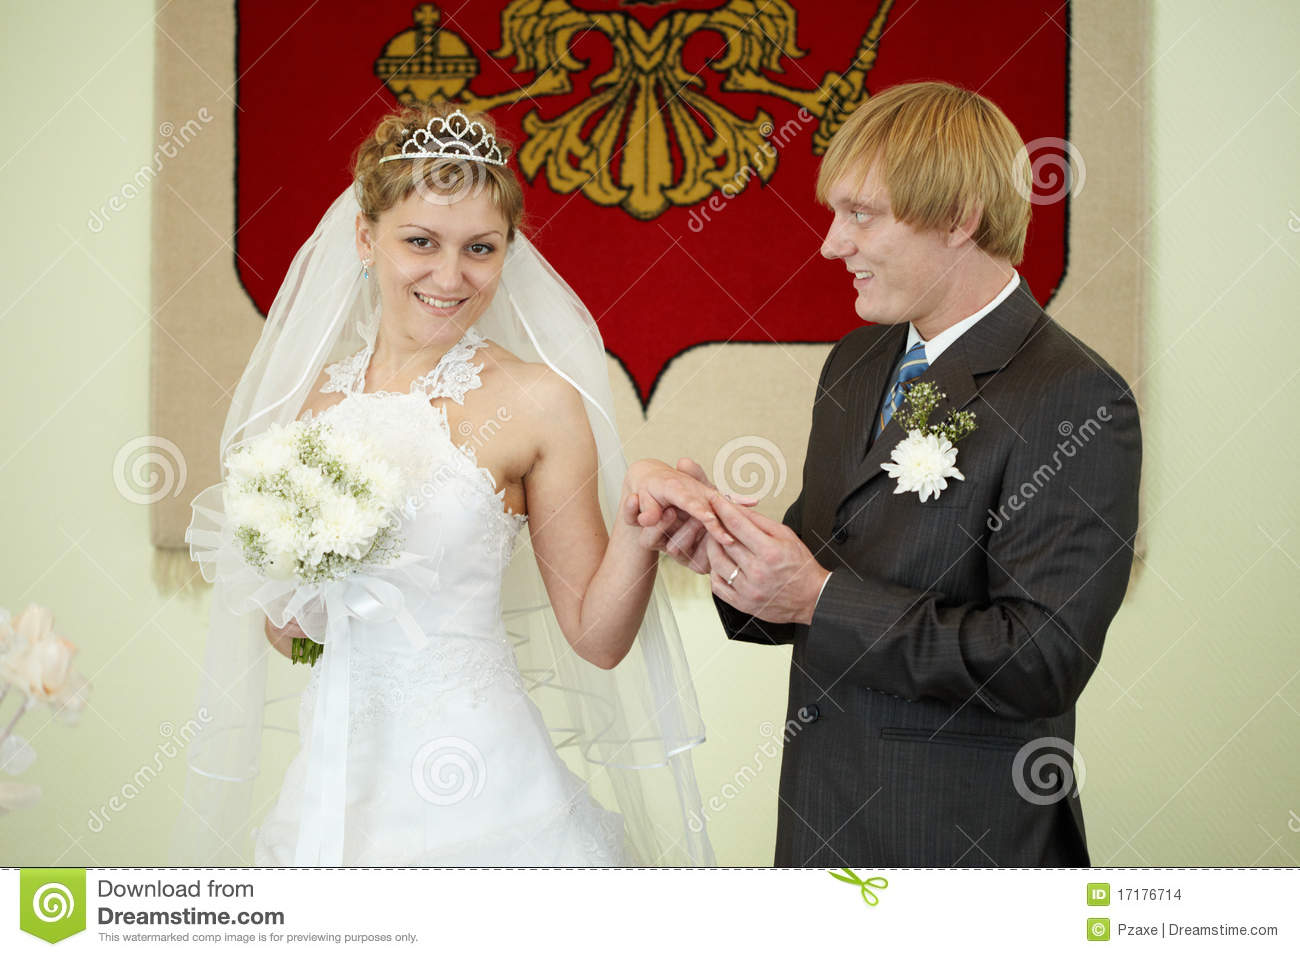 Groom Solemnly Puts Ring On Bride Stock Images   Image  17176714